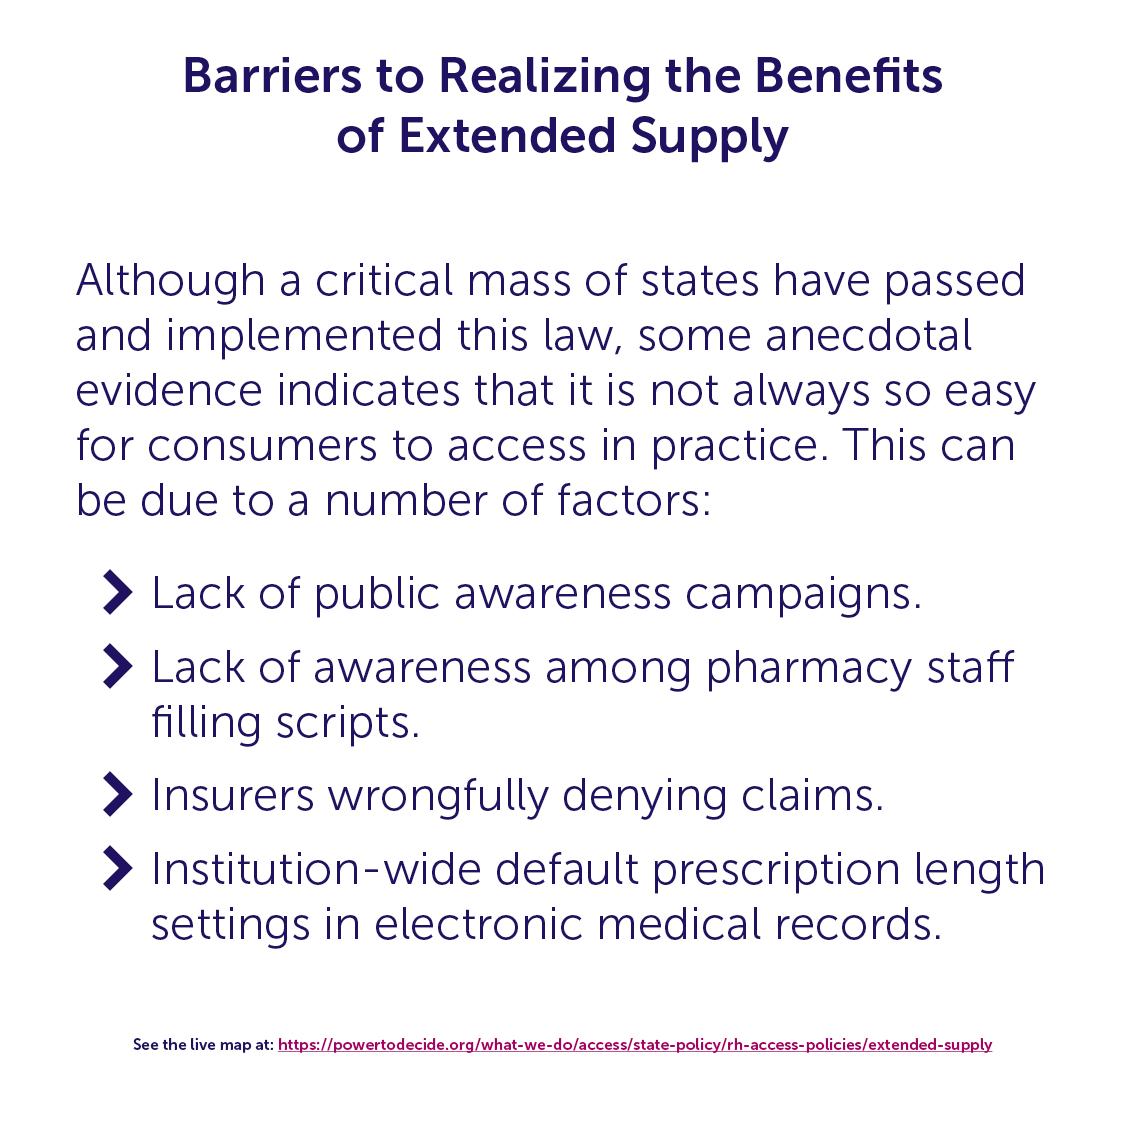 A graphic listing four barriers to realizing the benefits of extended supply of contraception. 